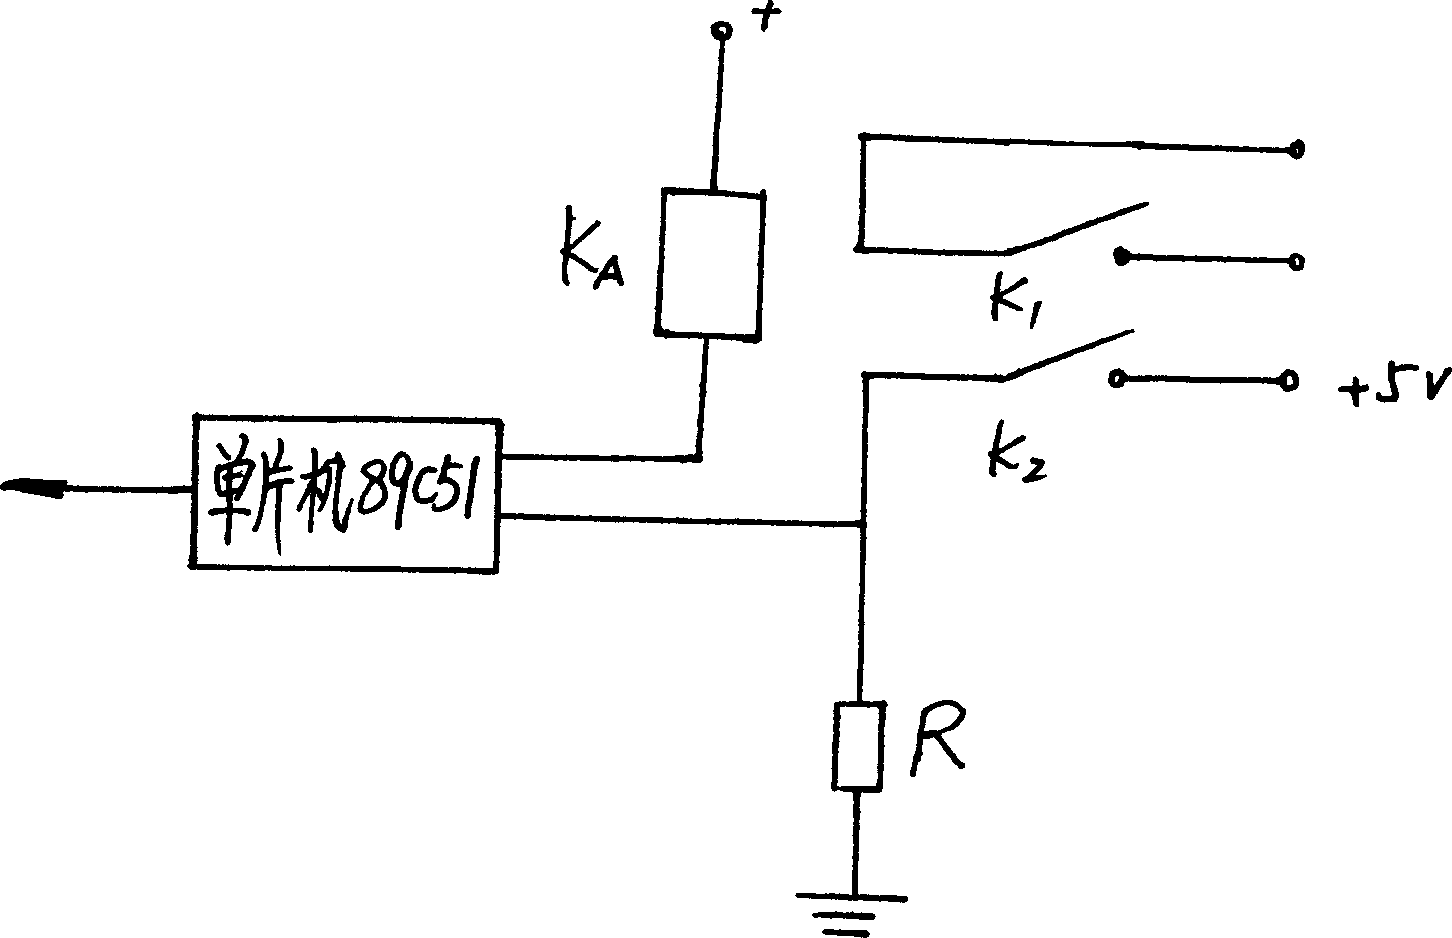 Controller of outputting circuit for relay